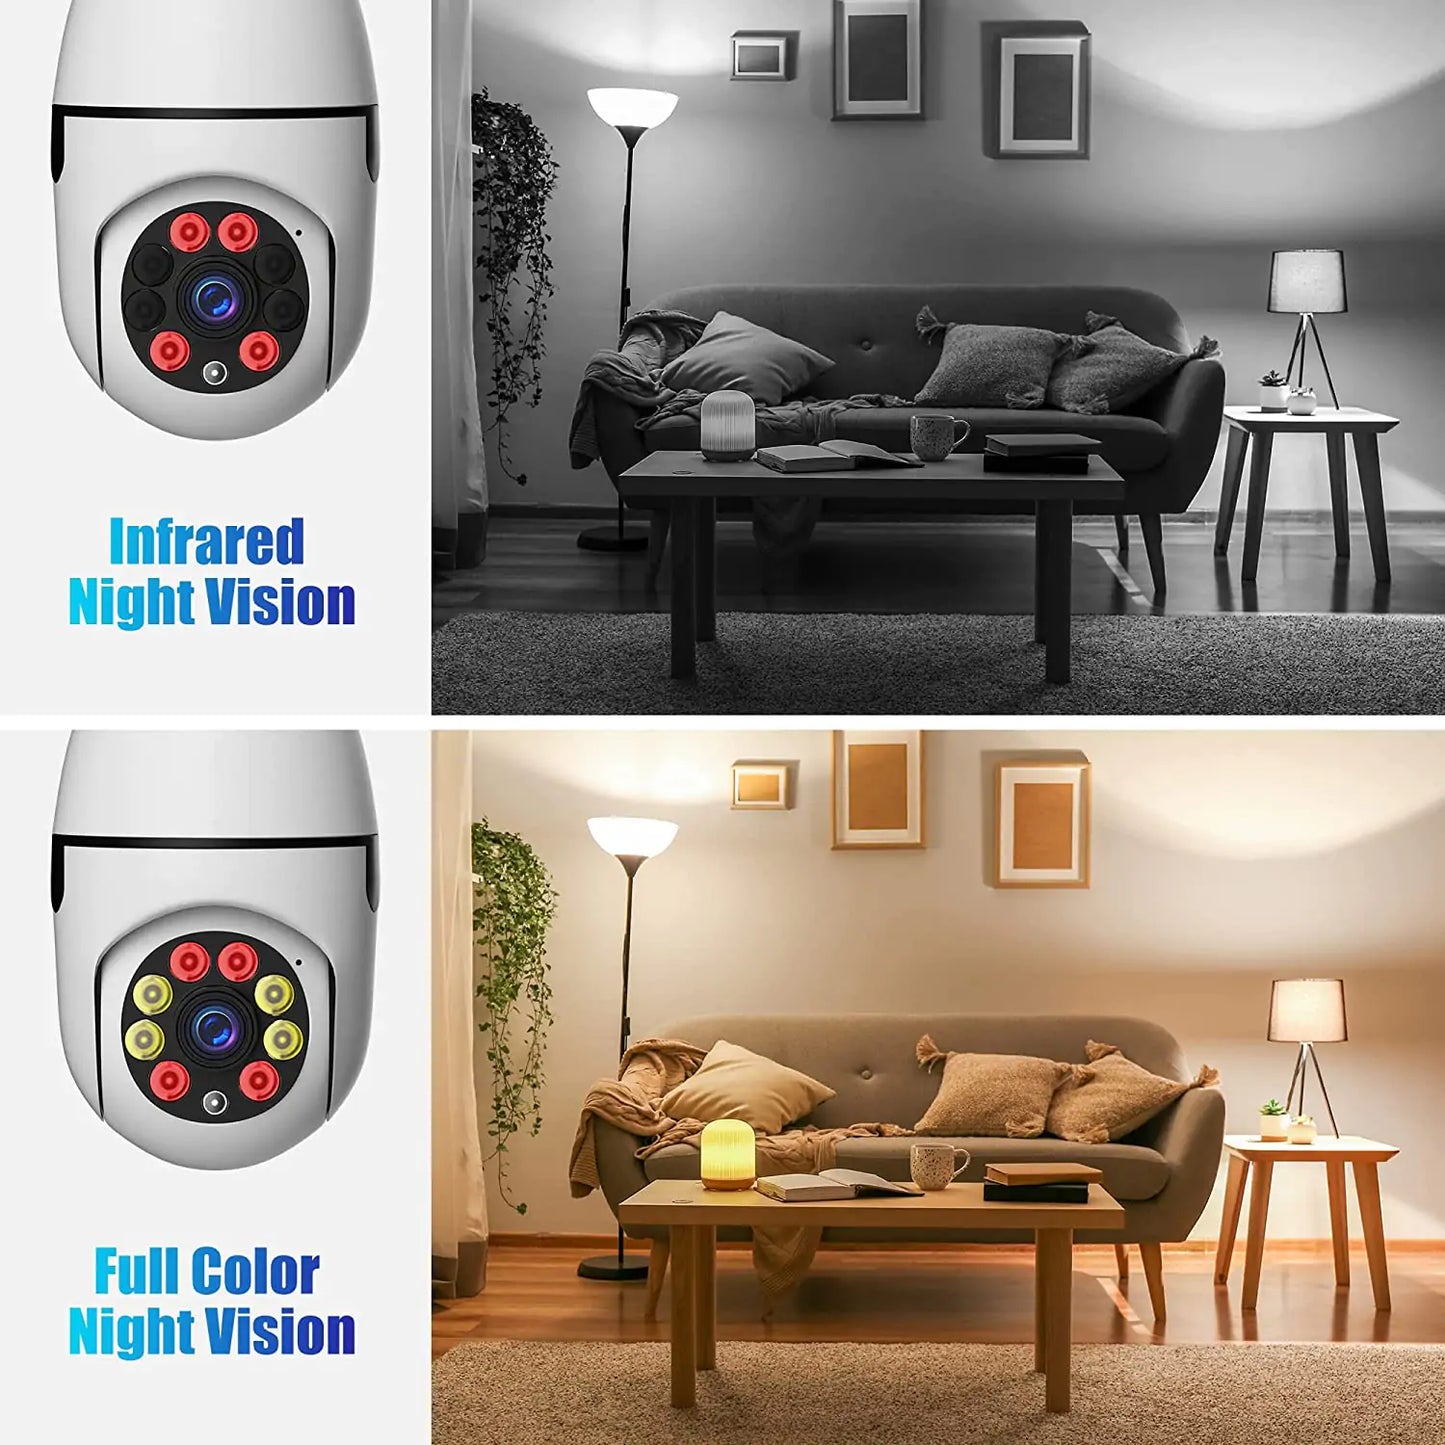 Night Vision Security Camera  79.99 THIS WEEK! LIMITED QUANTITY!